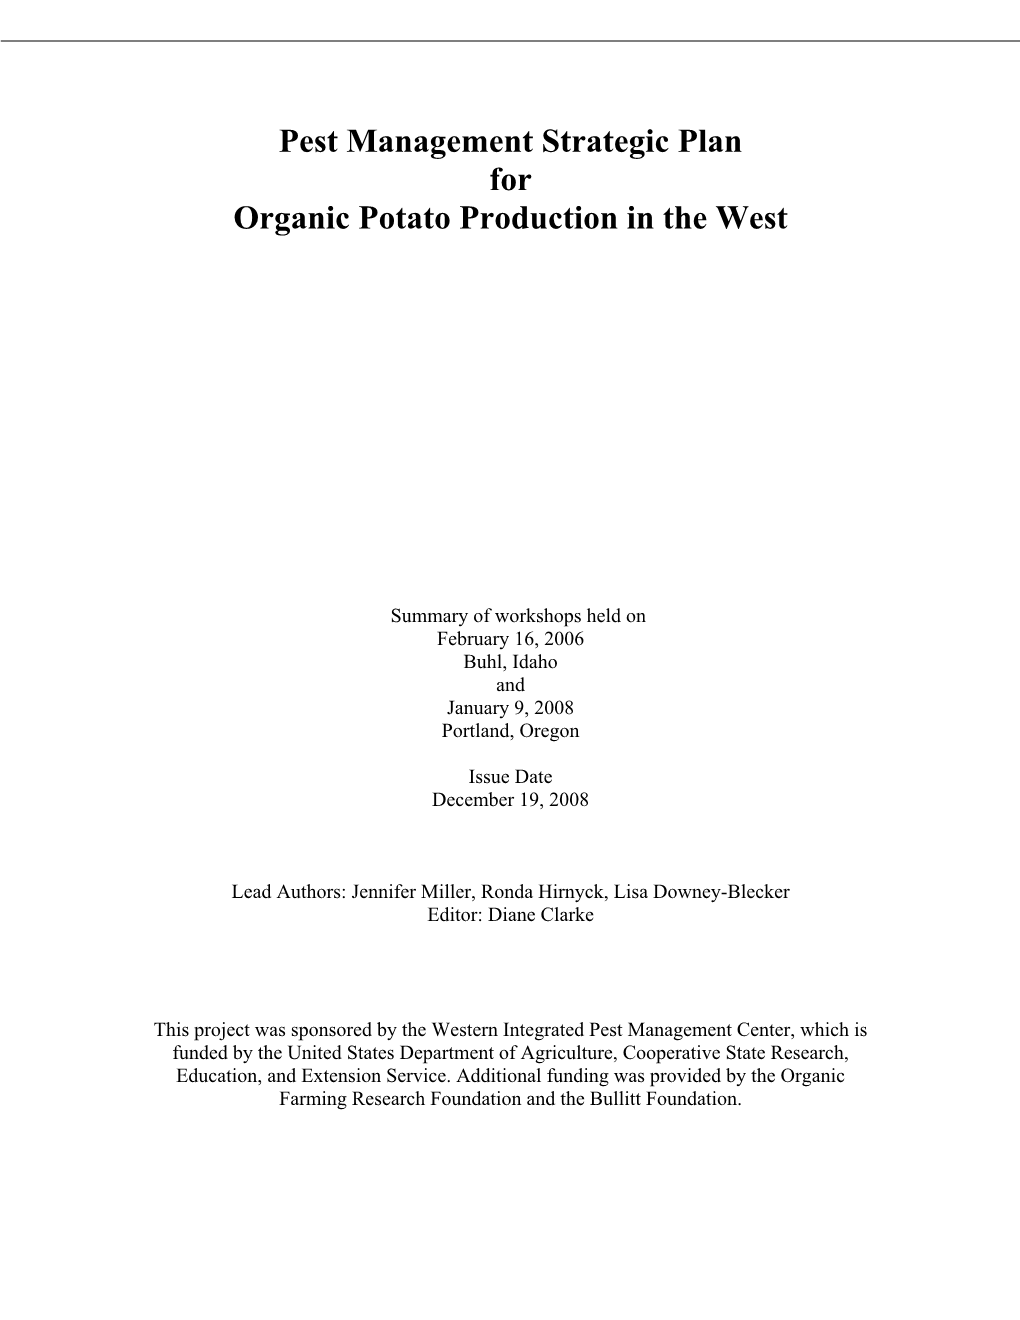 Pest Management Strategic Plan for Organic Potato Production in the West